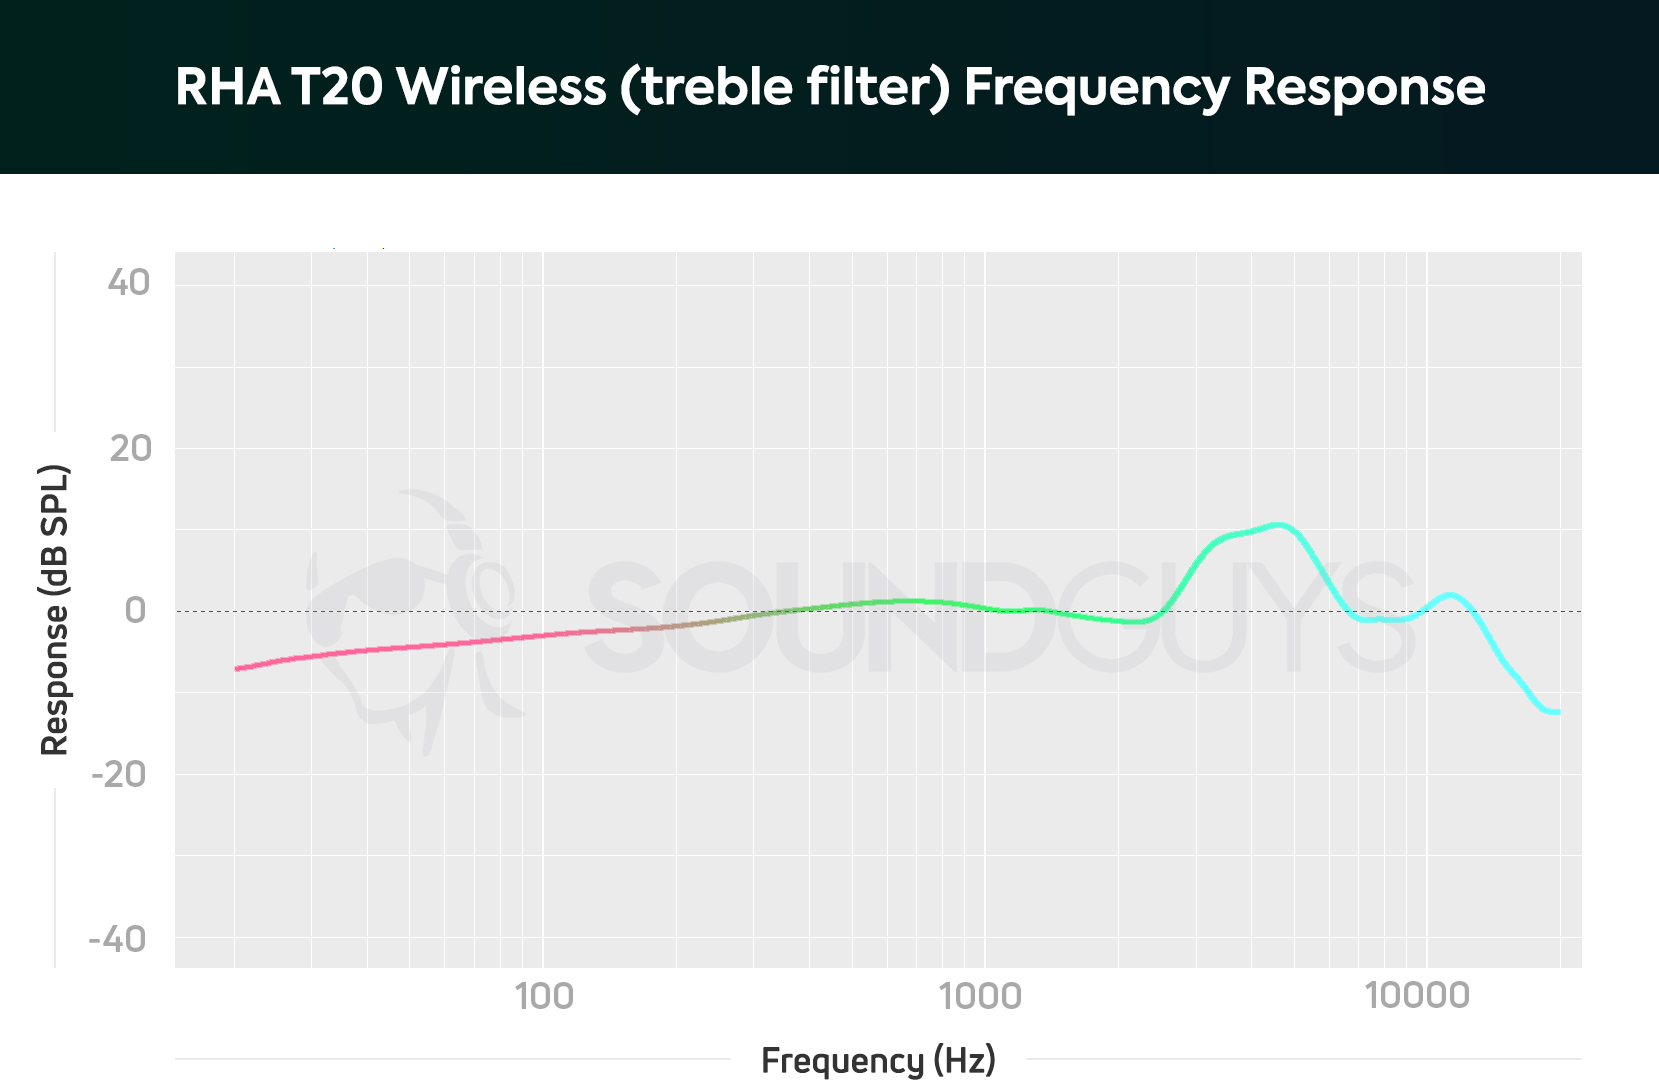 RHA T20 Wireless frequency response chart with the treble filter installed.